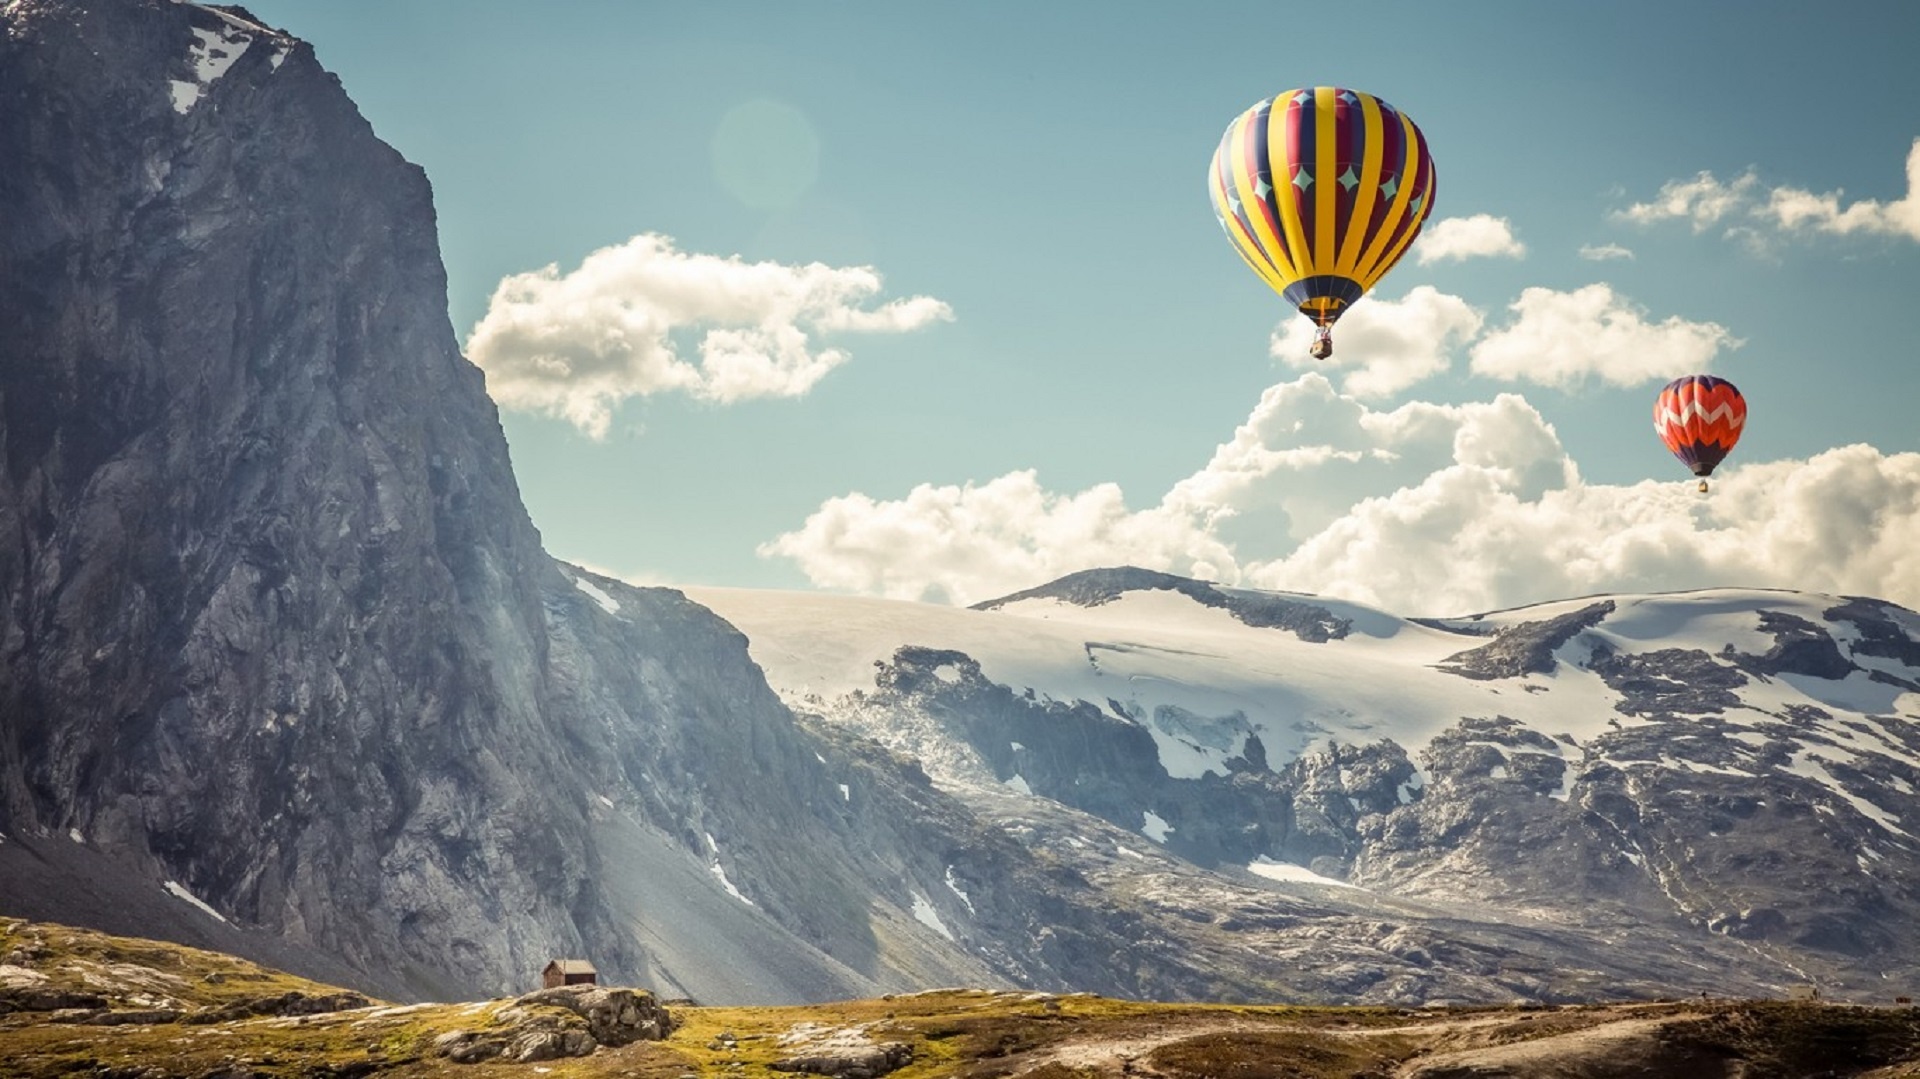 Hot Air Balloons floating through the mountains